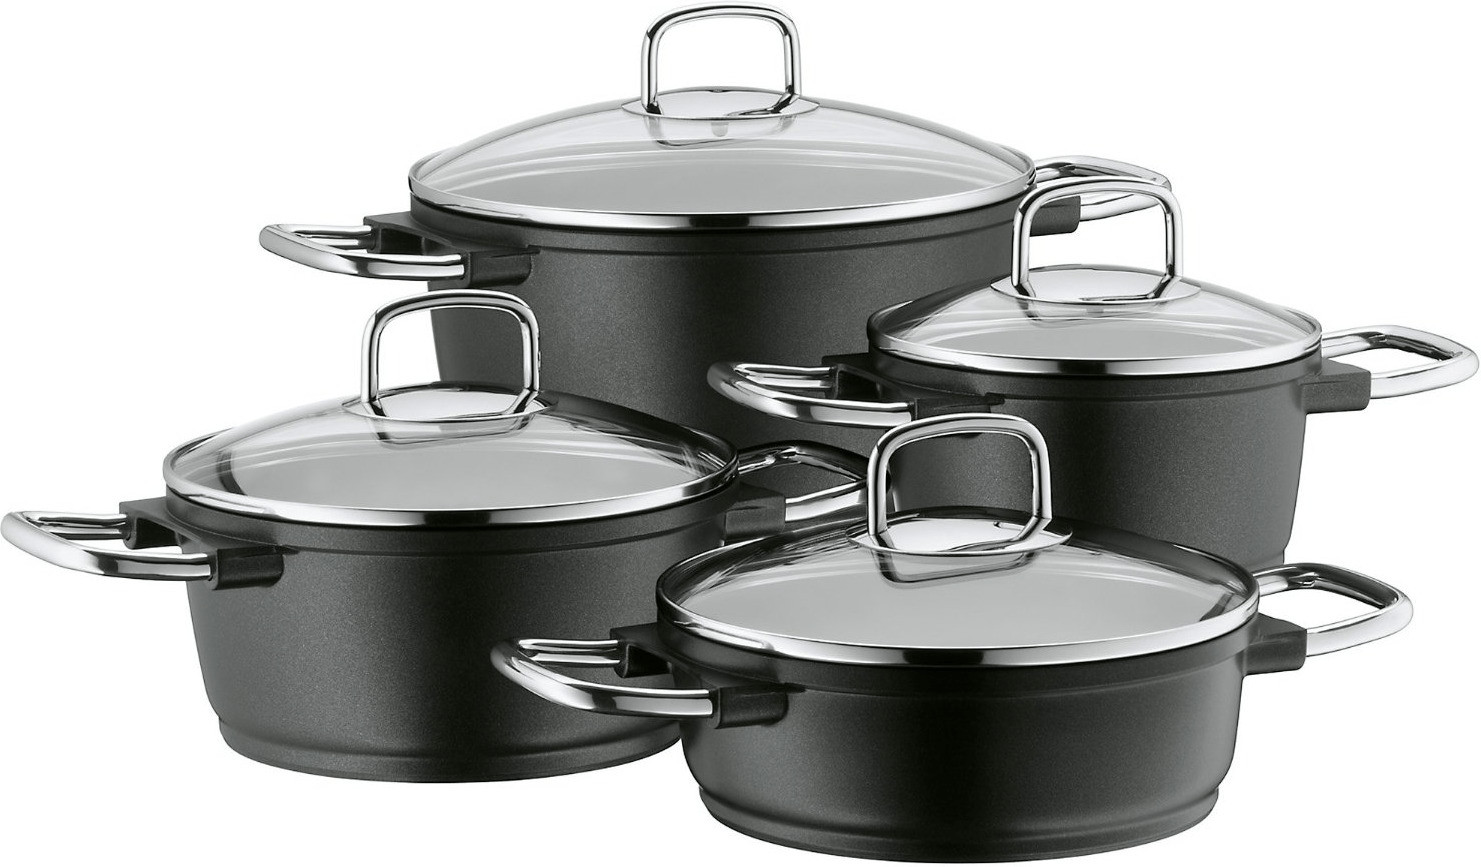 WMF Bueno 4-Piece Induction Cookware Set